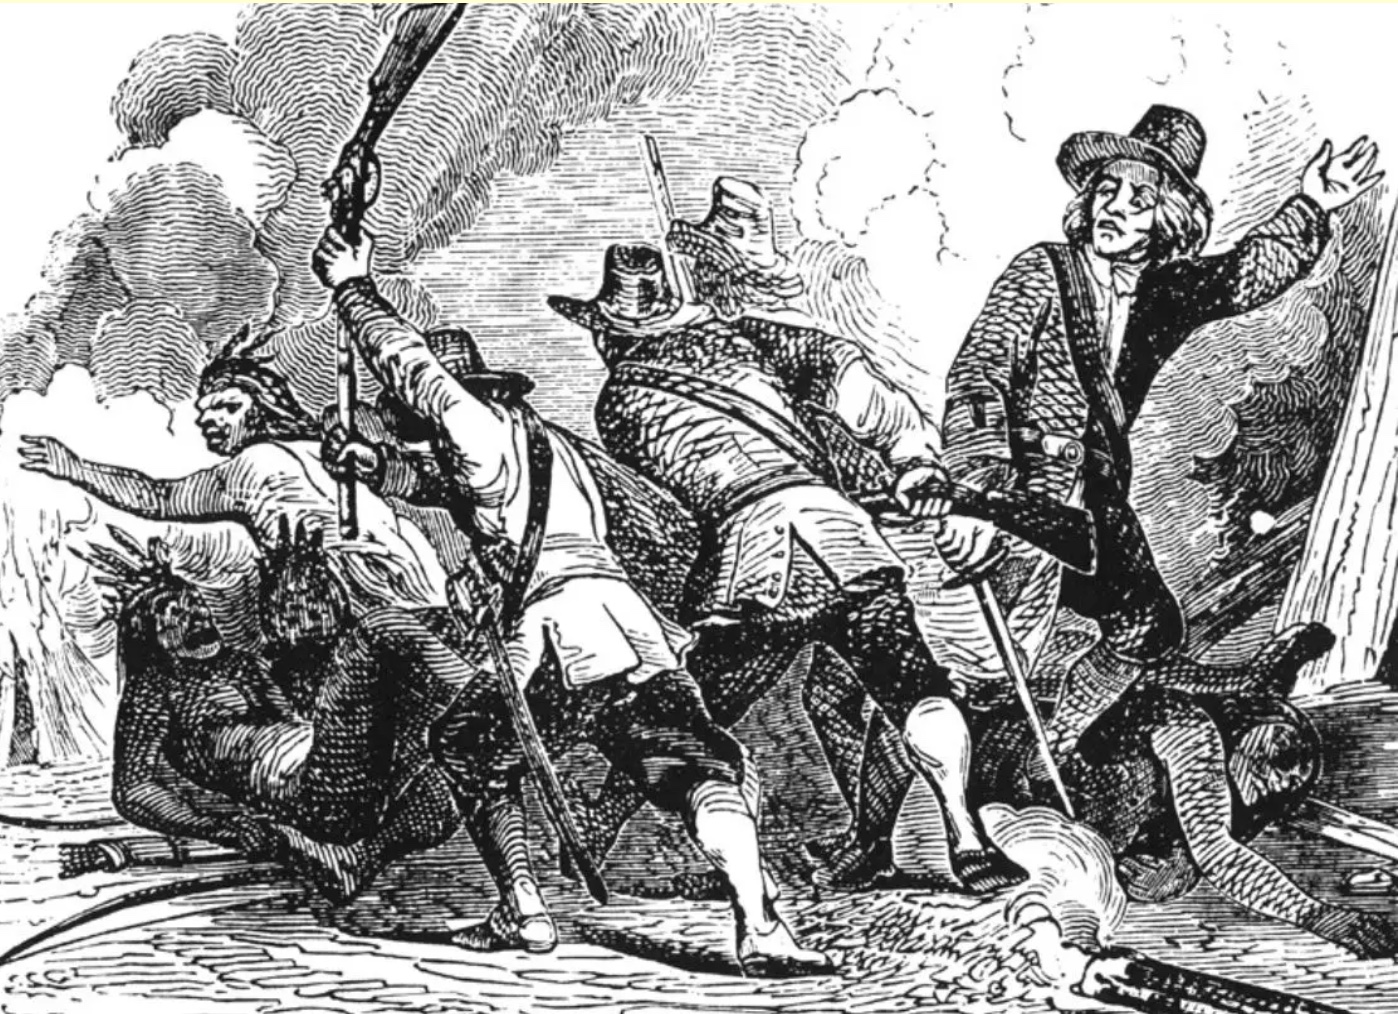 Engraving of English Puritans fighting Pequots